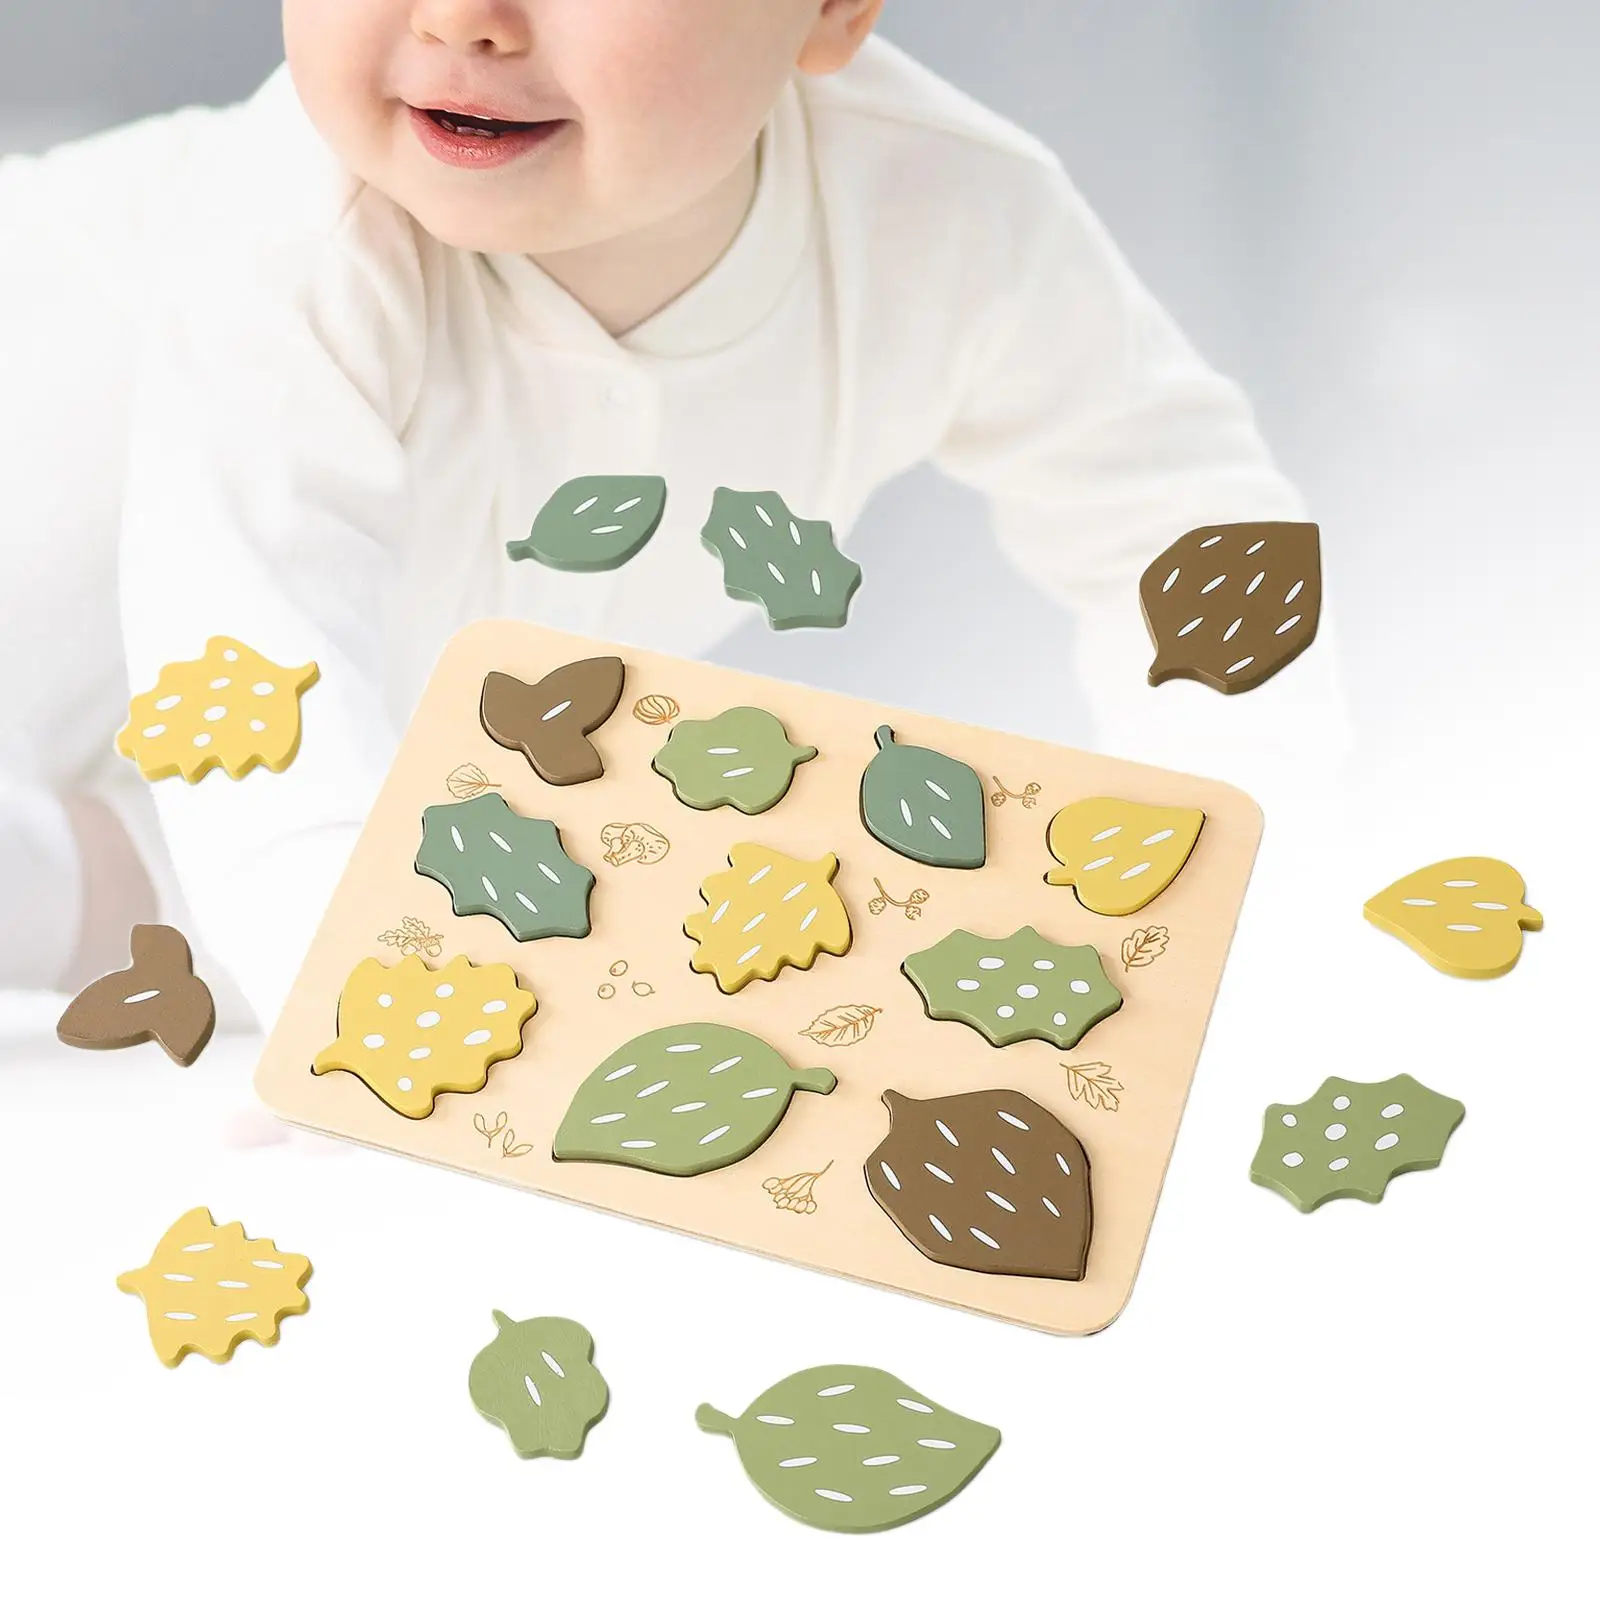 Wooden Leaf Jigsaw Puzzles Hand Eye Coordination Educational Sorting Puzzle Montessori Colorful Shape for Girls Toddlers Boys